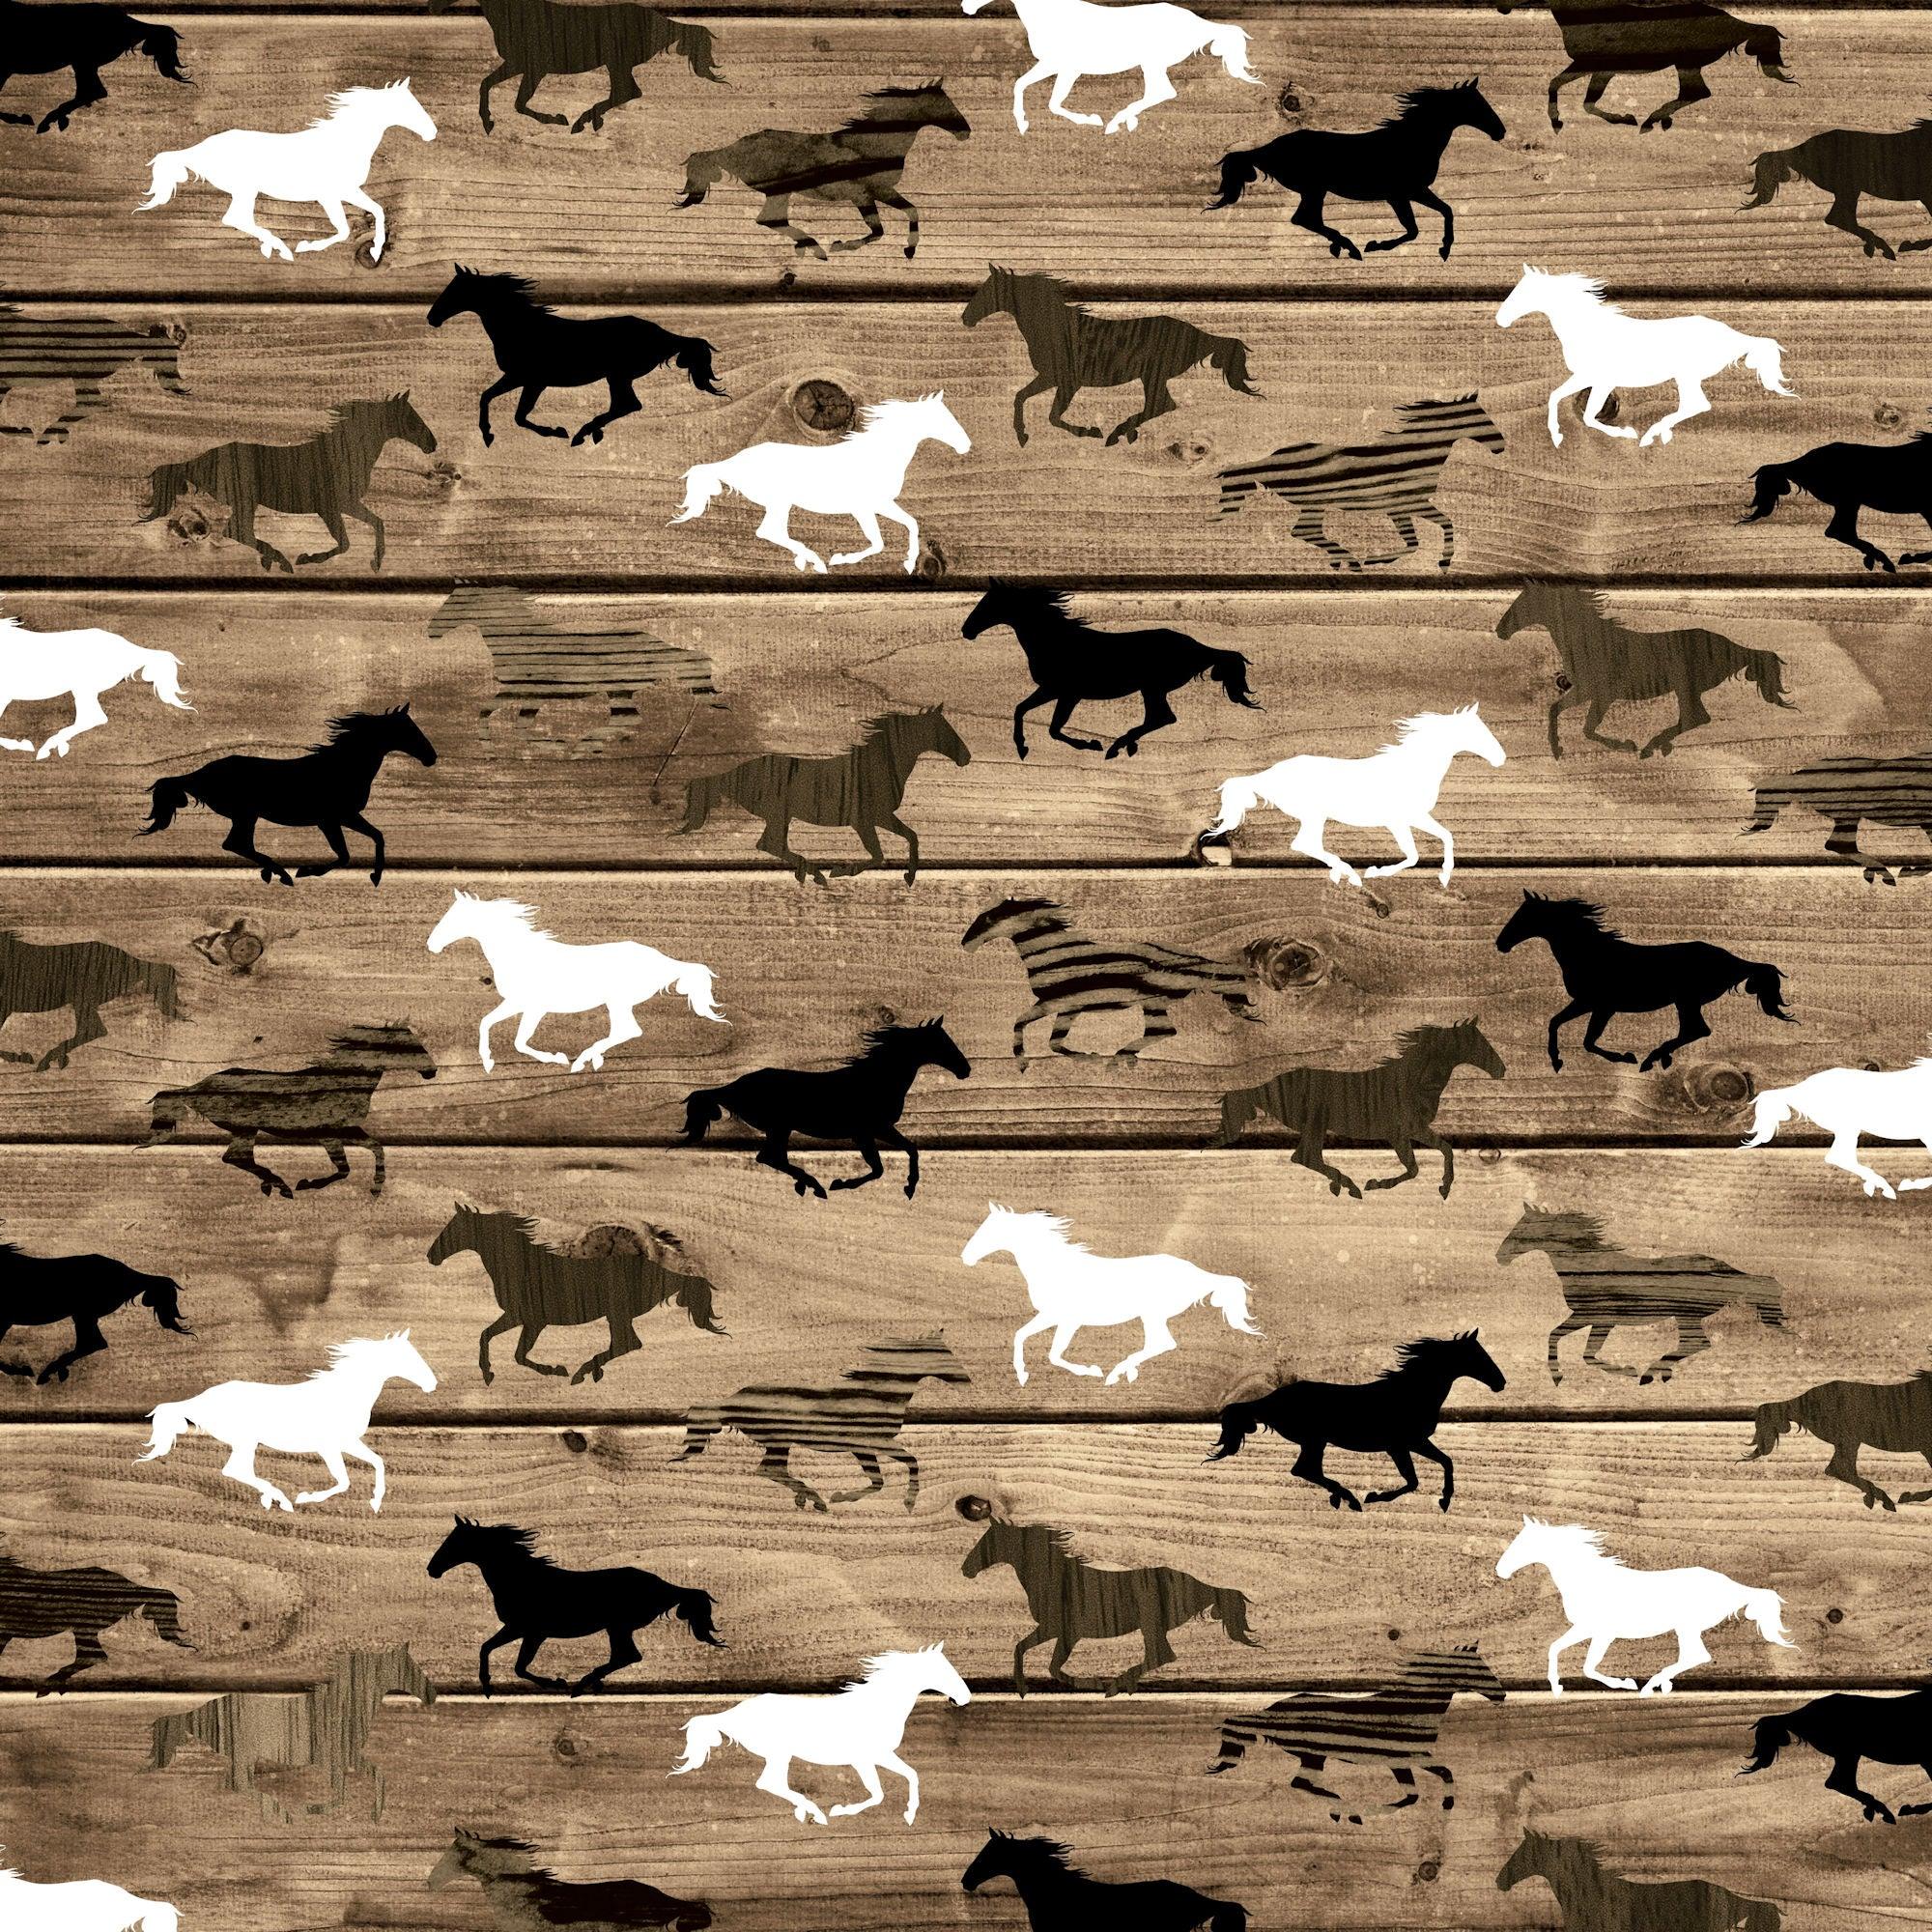 Cowboys Collection Wild Horses 12 x 12 Double-Sided Scrapbook Paper by SSC Designs